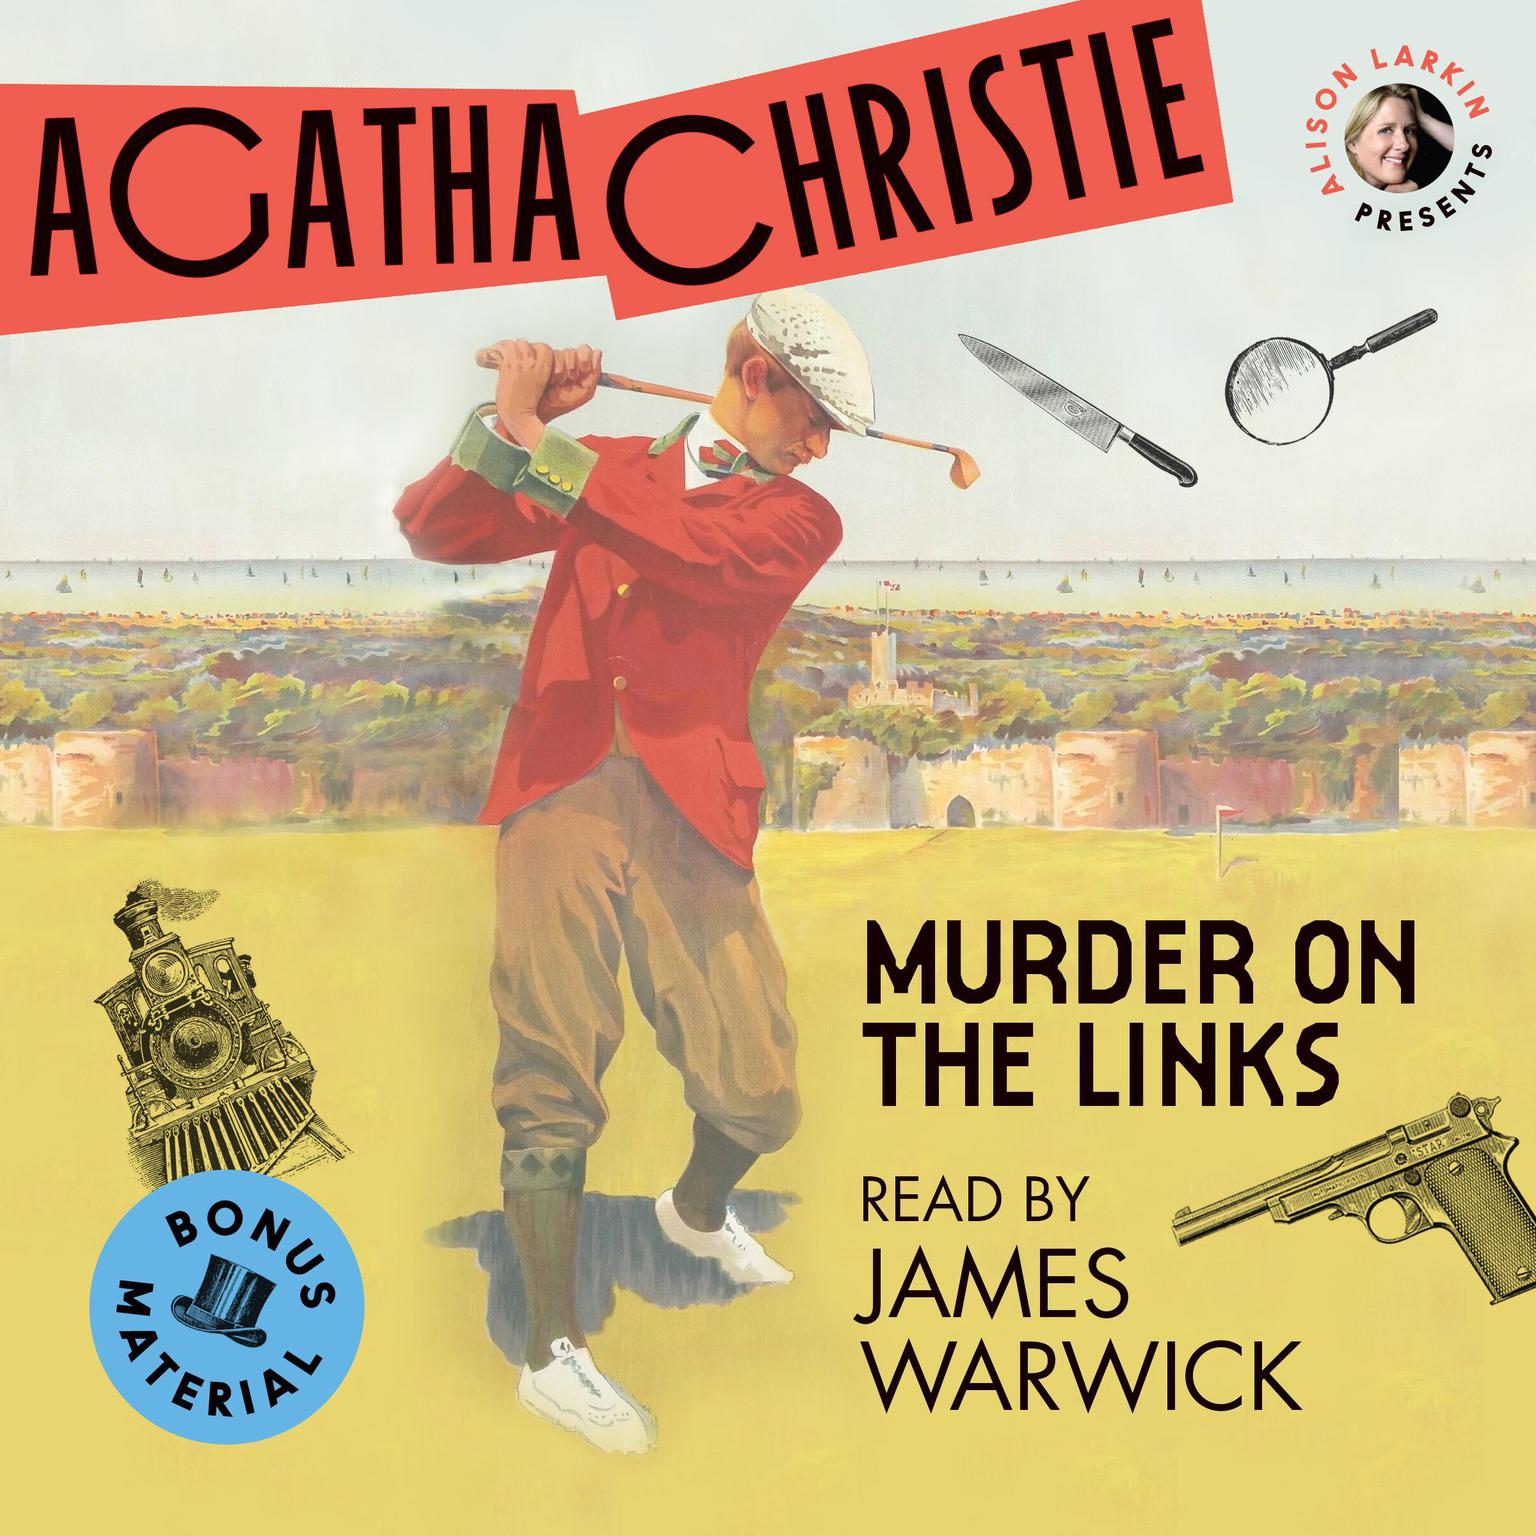 Murder on the Links Audiobook, by Agatha Christie